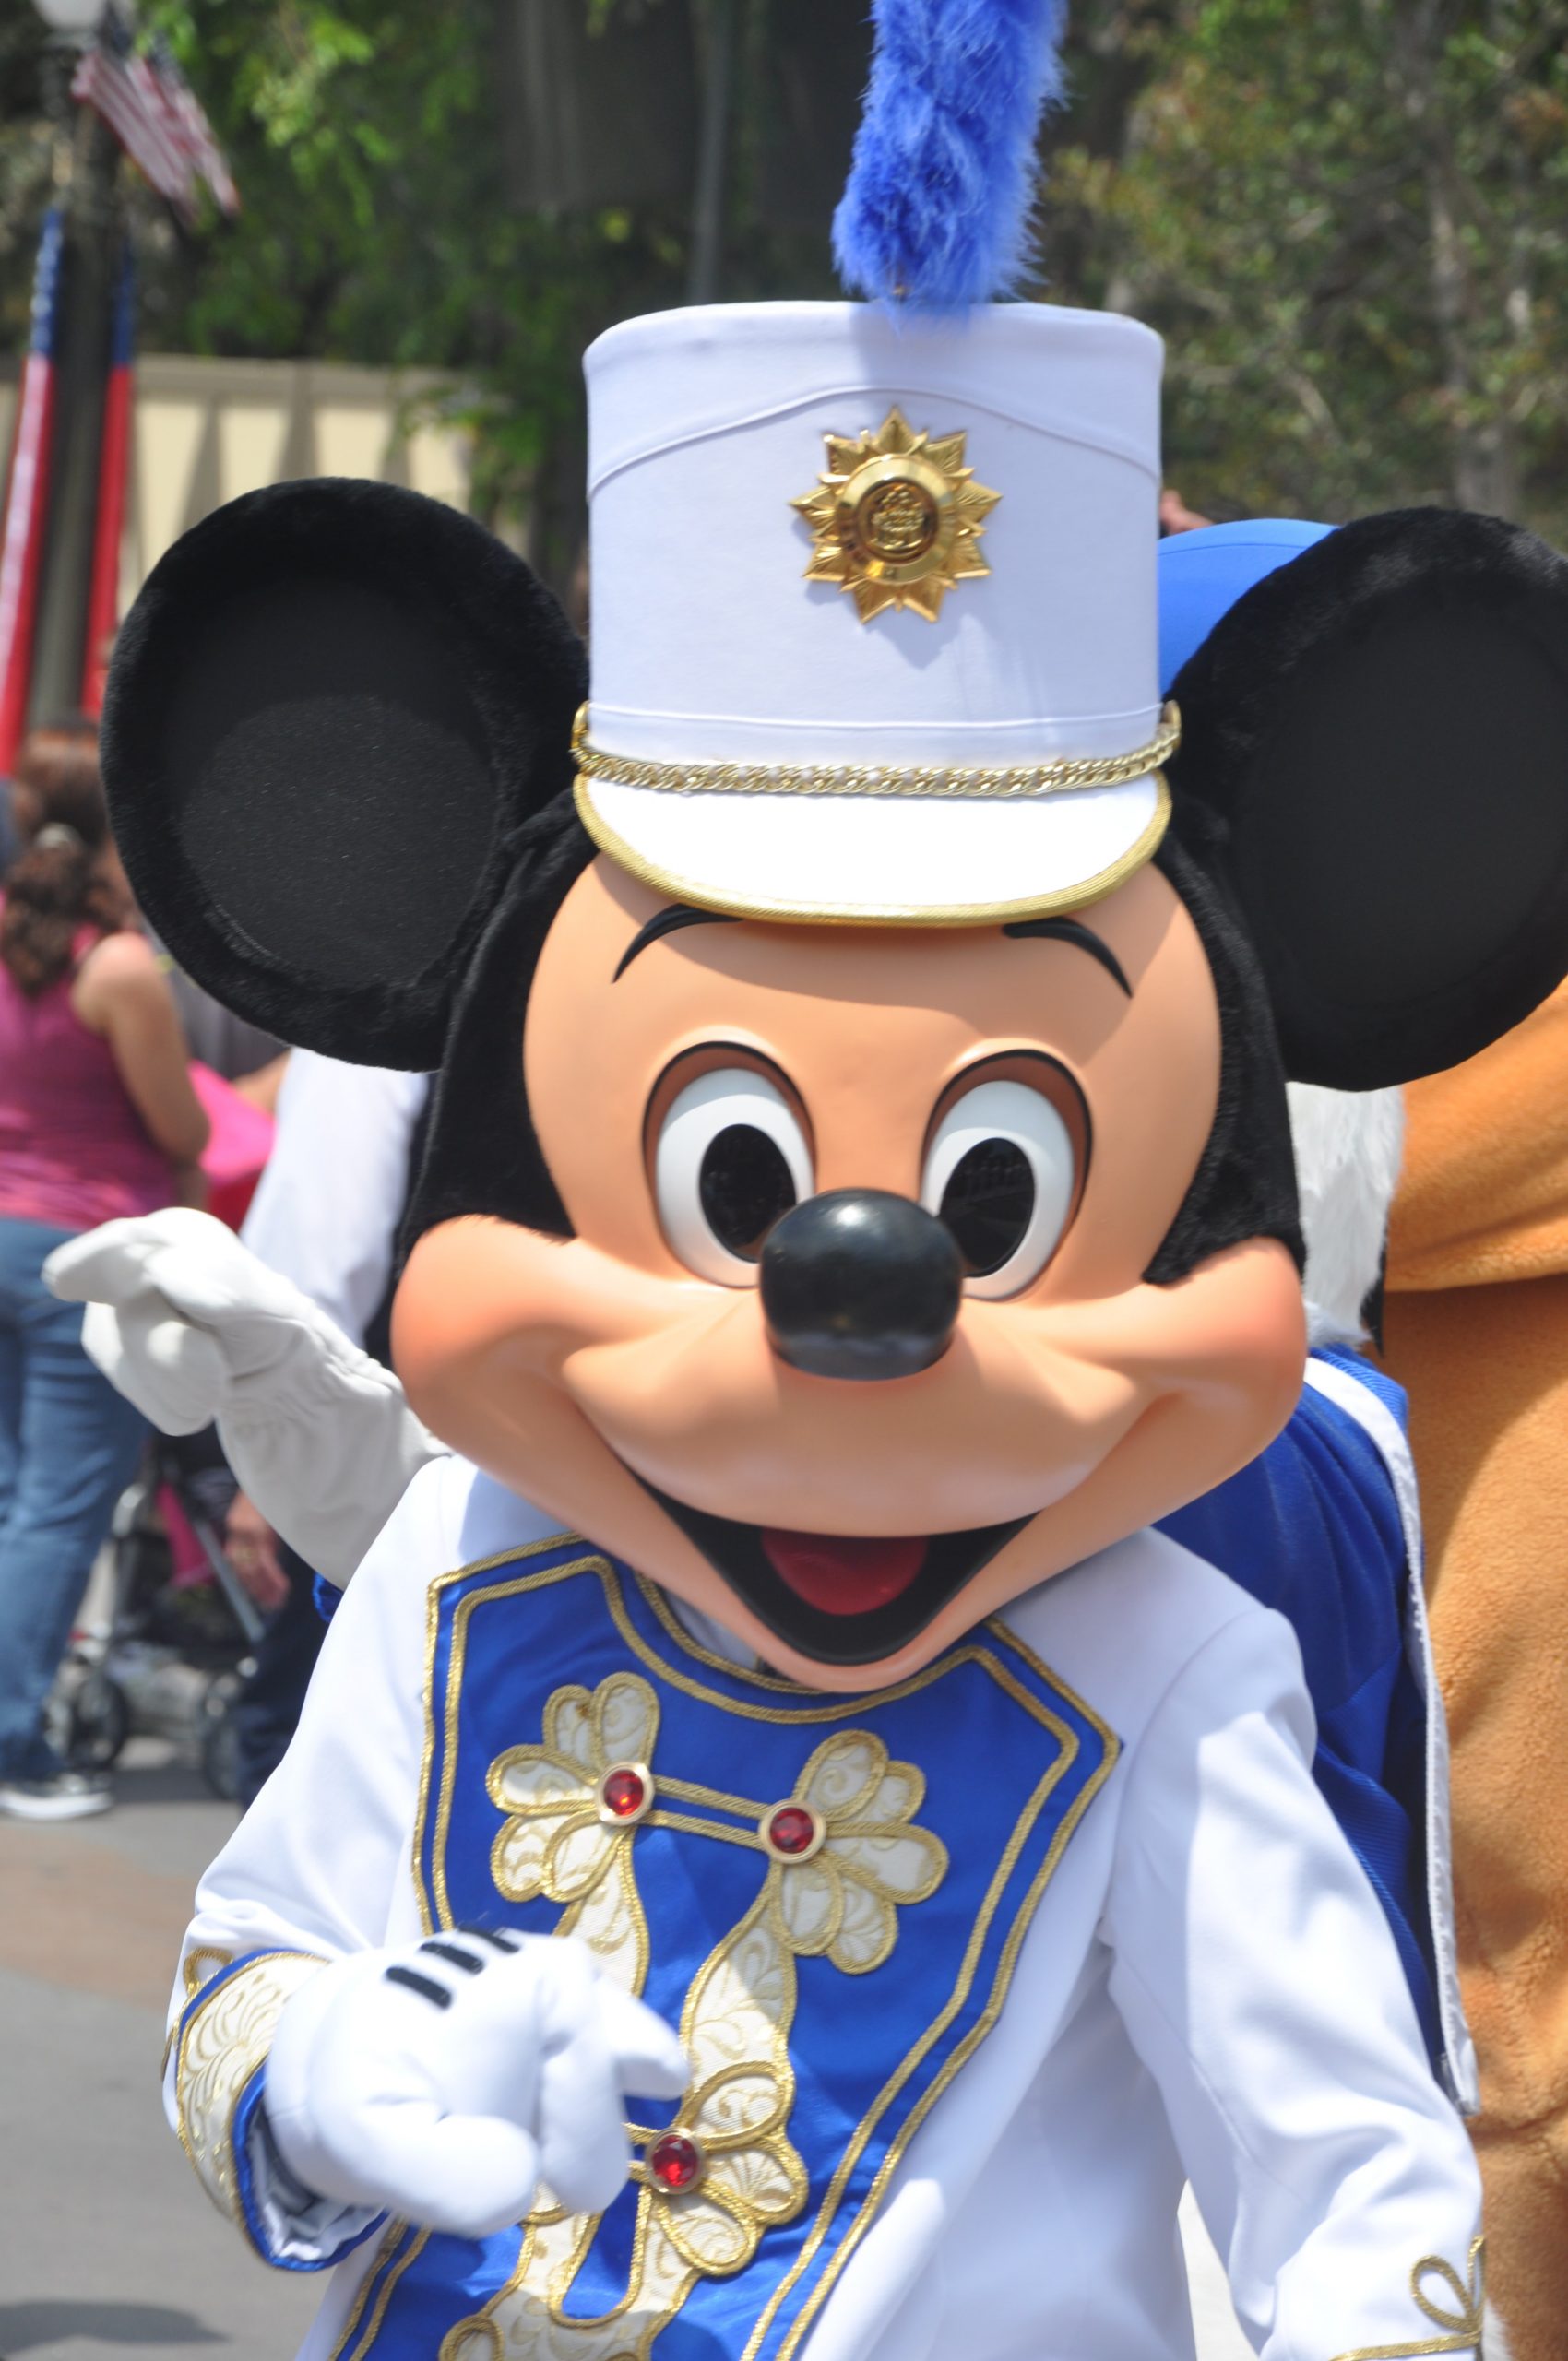 A shoulders up image of the Mickey Mouse mascot from Disney World 